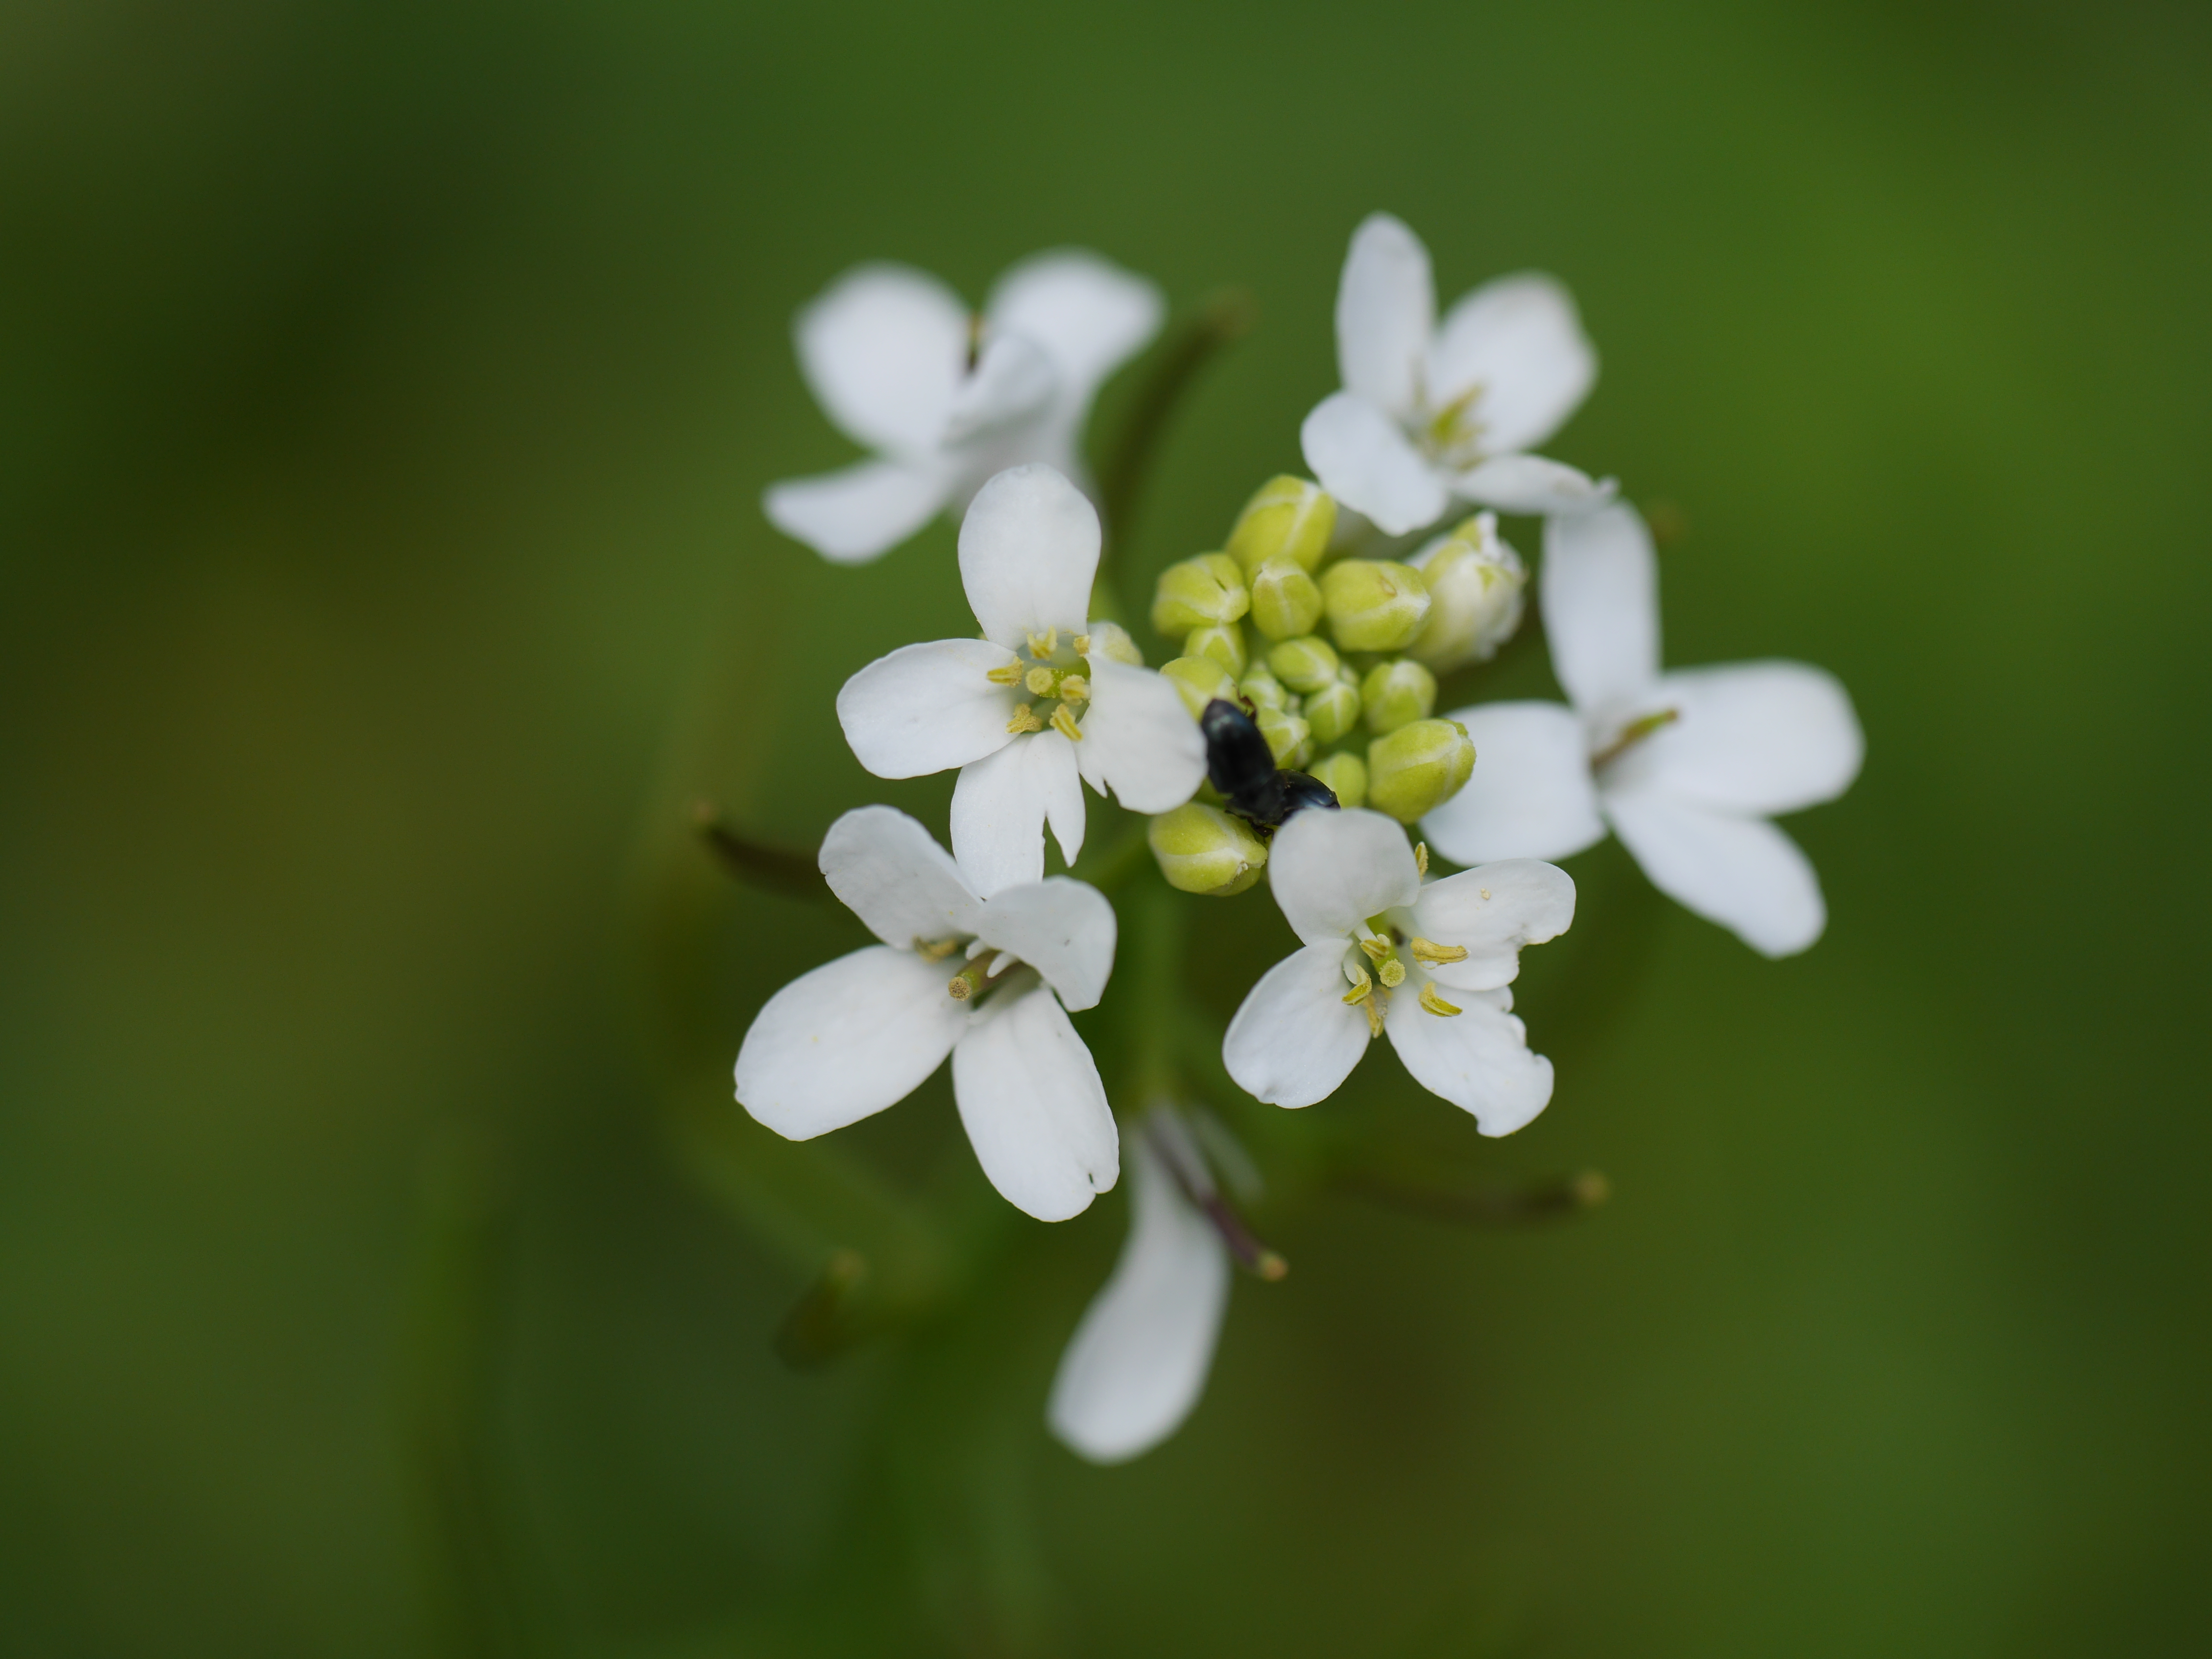 A close-up photograph of an Arabidopsis plant shows tiny green buds and small white flowers with four petals